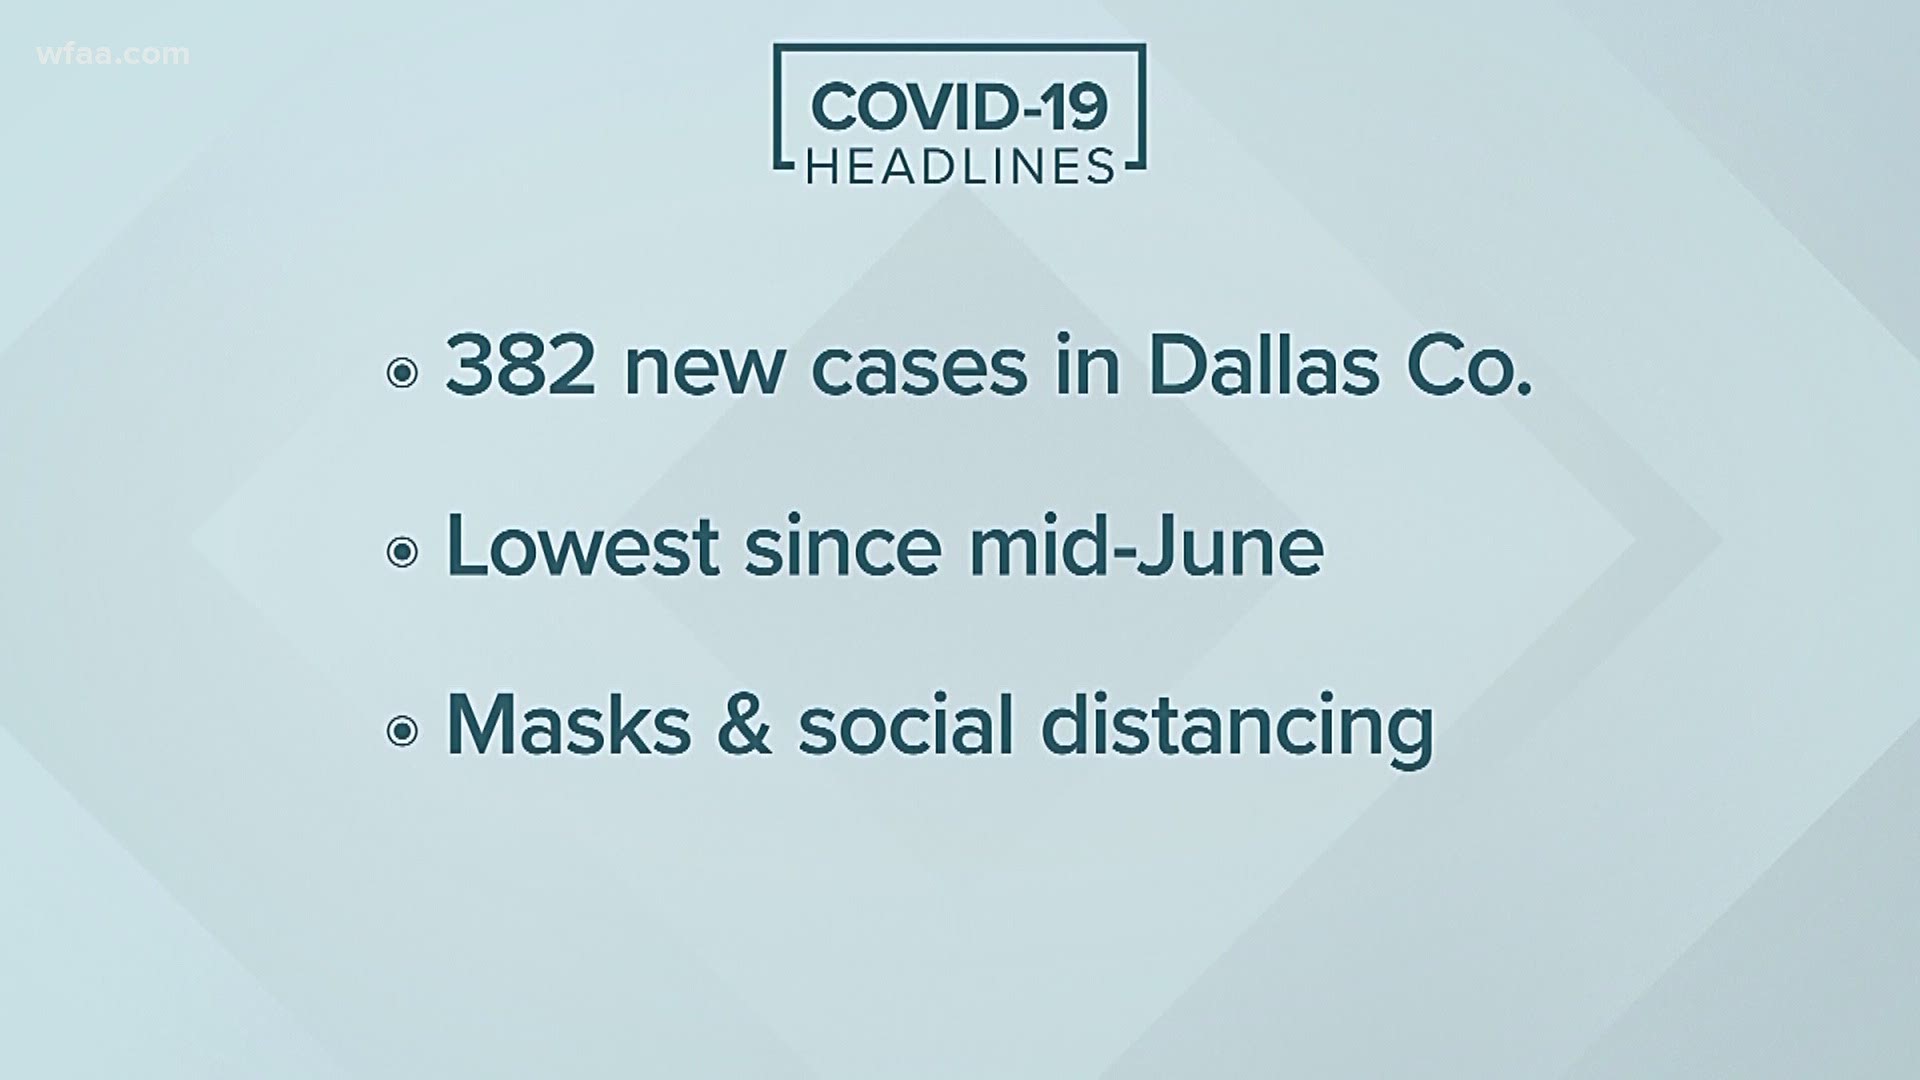 Dallas County Judge Clay Jenkins said people wearing masks has helped reduce the spread of COVID-19.